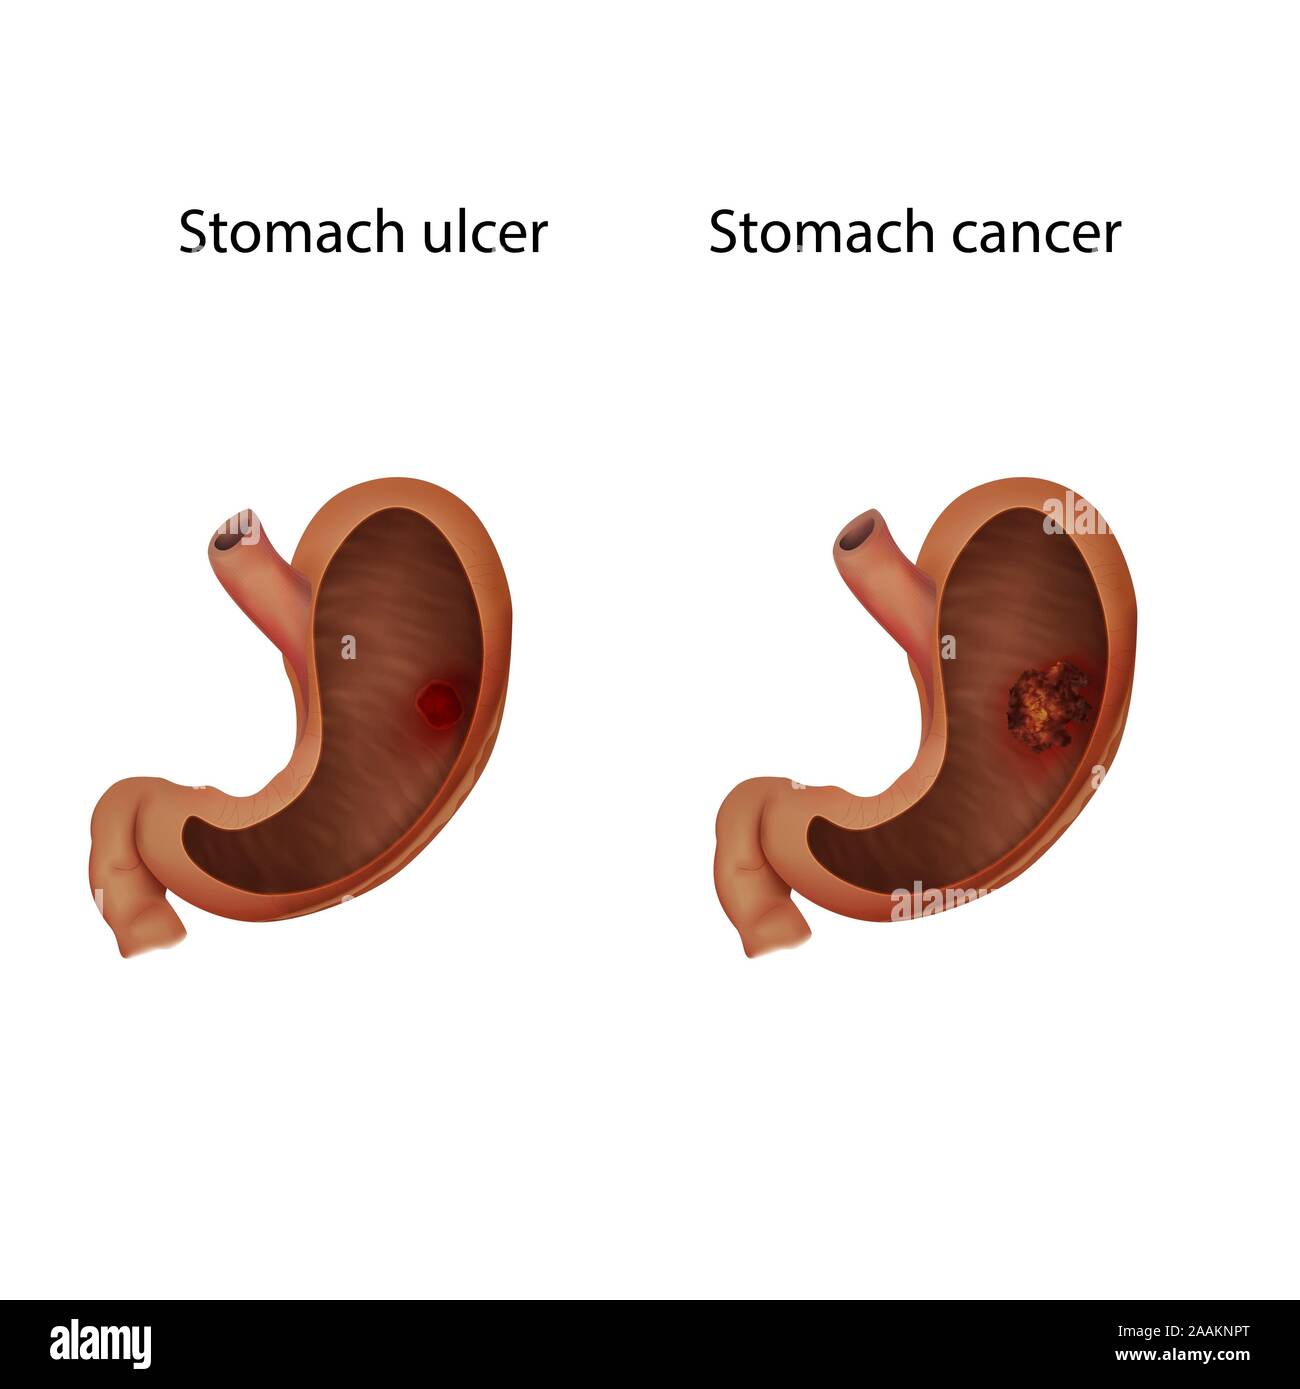 Stomach ulcer and stomach cancer, illustration. Stock Photo